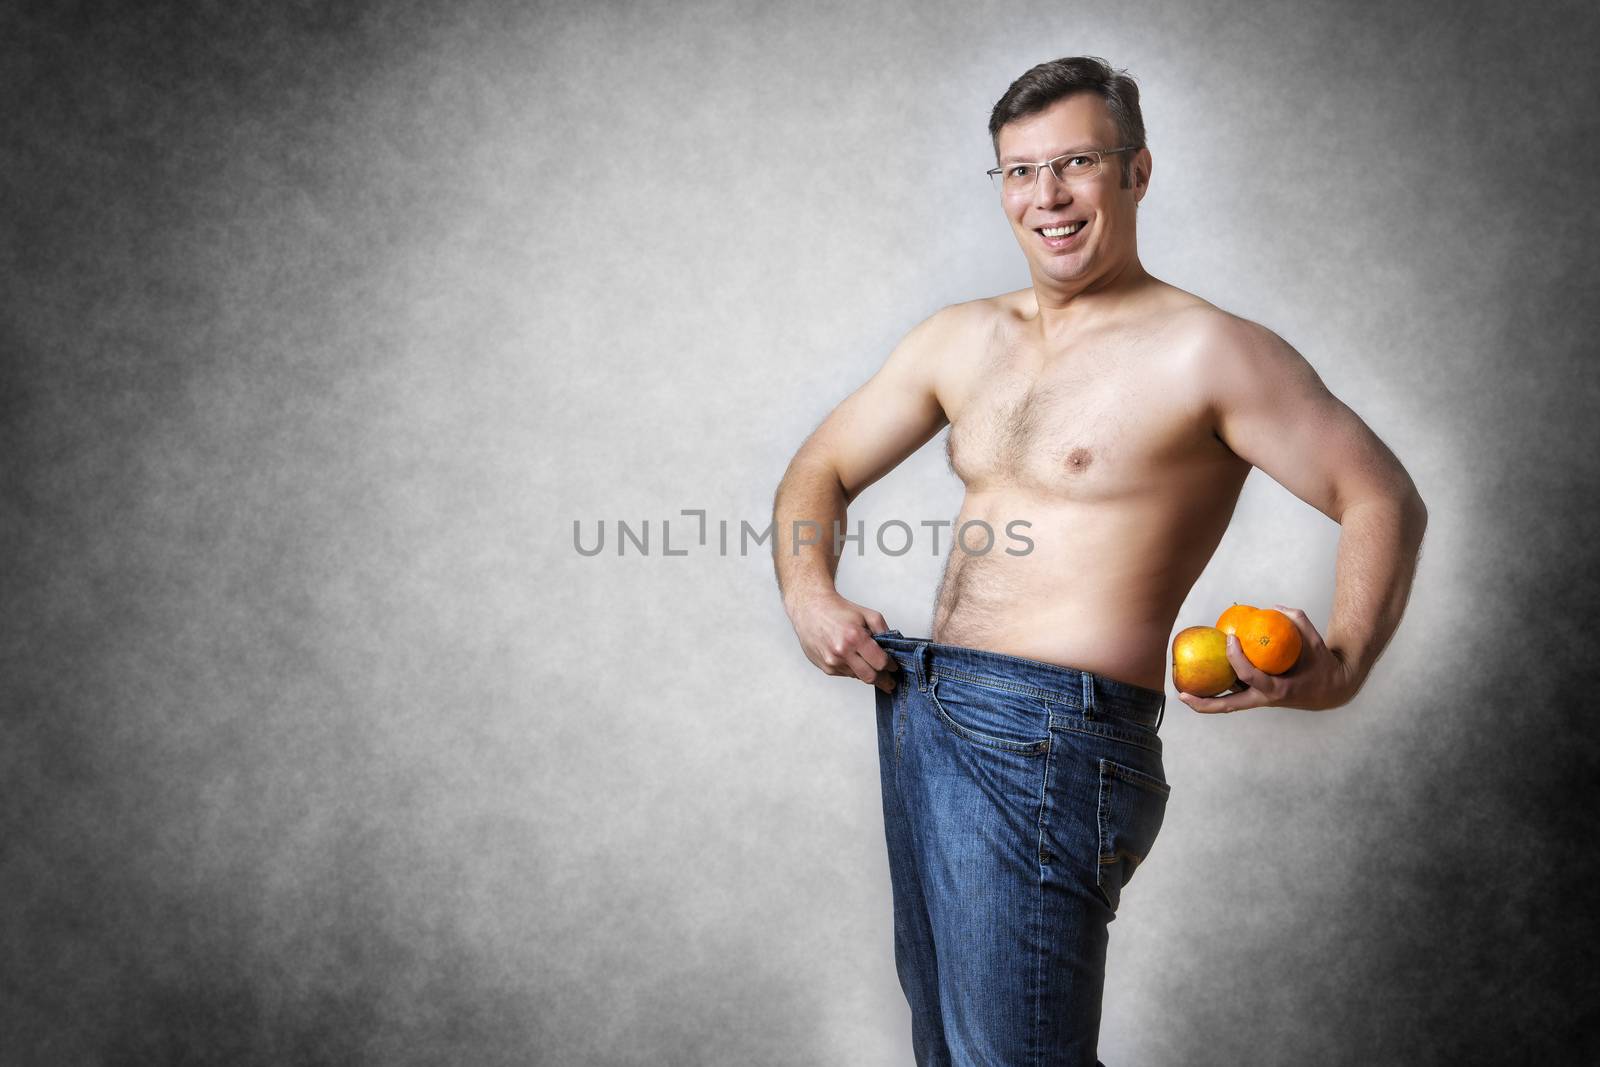 Image of a man in blue jeans with fruits who has lost body weight